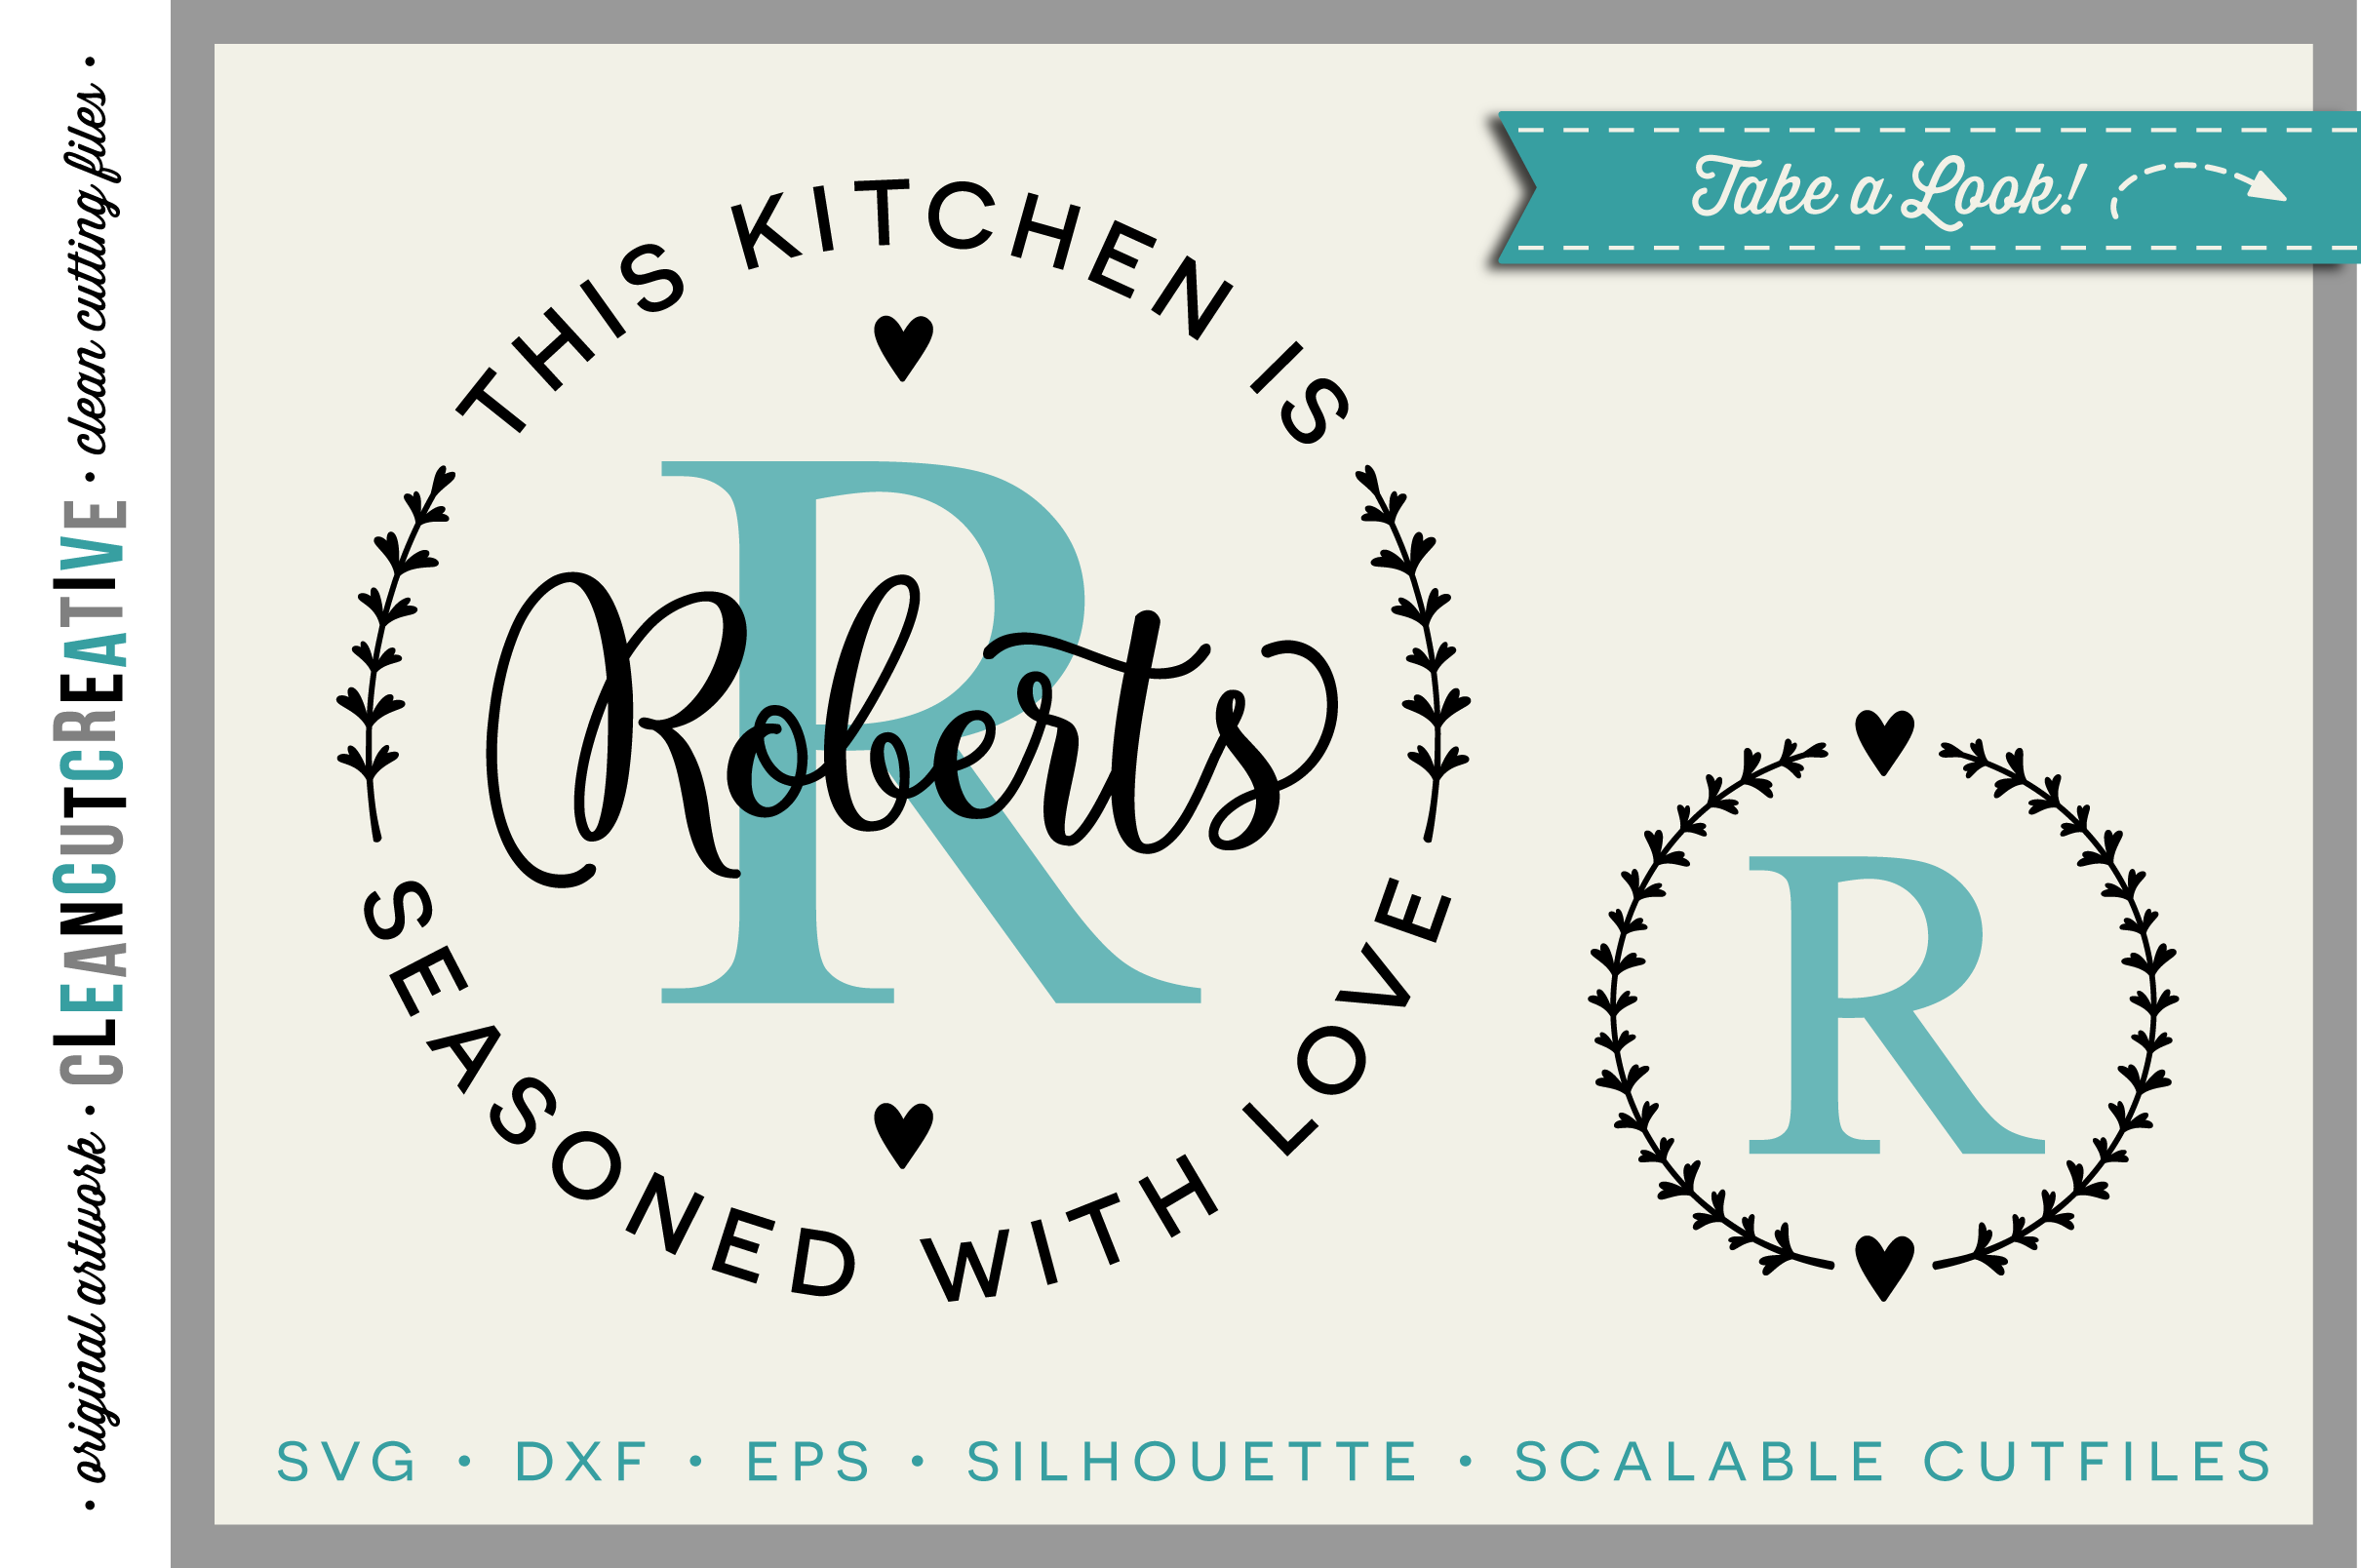 Free Free 156 This Kitchen Is Seasoned With Love Free Svg SVG PNG EPS DXF File